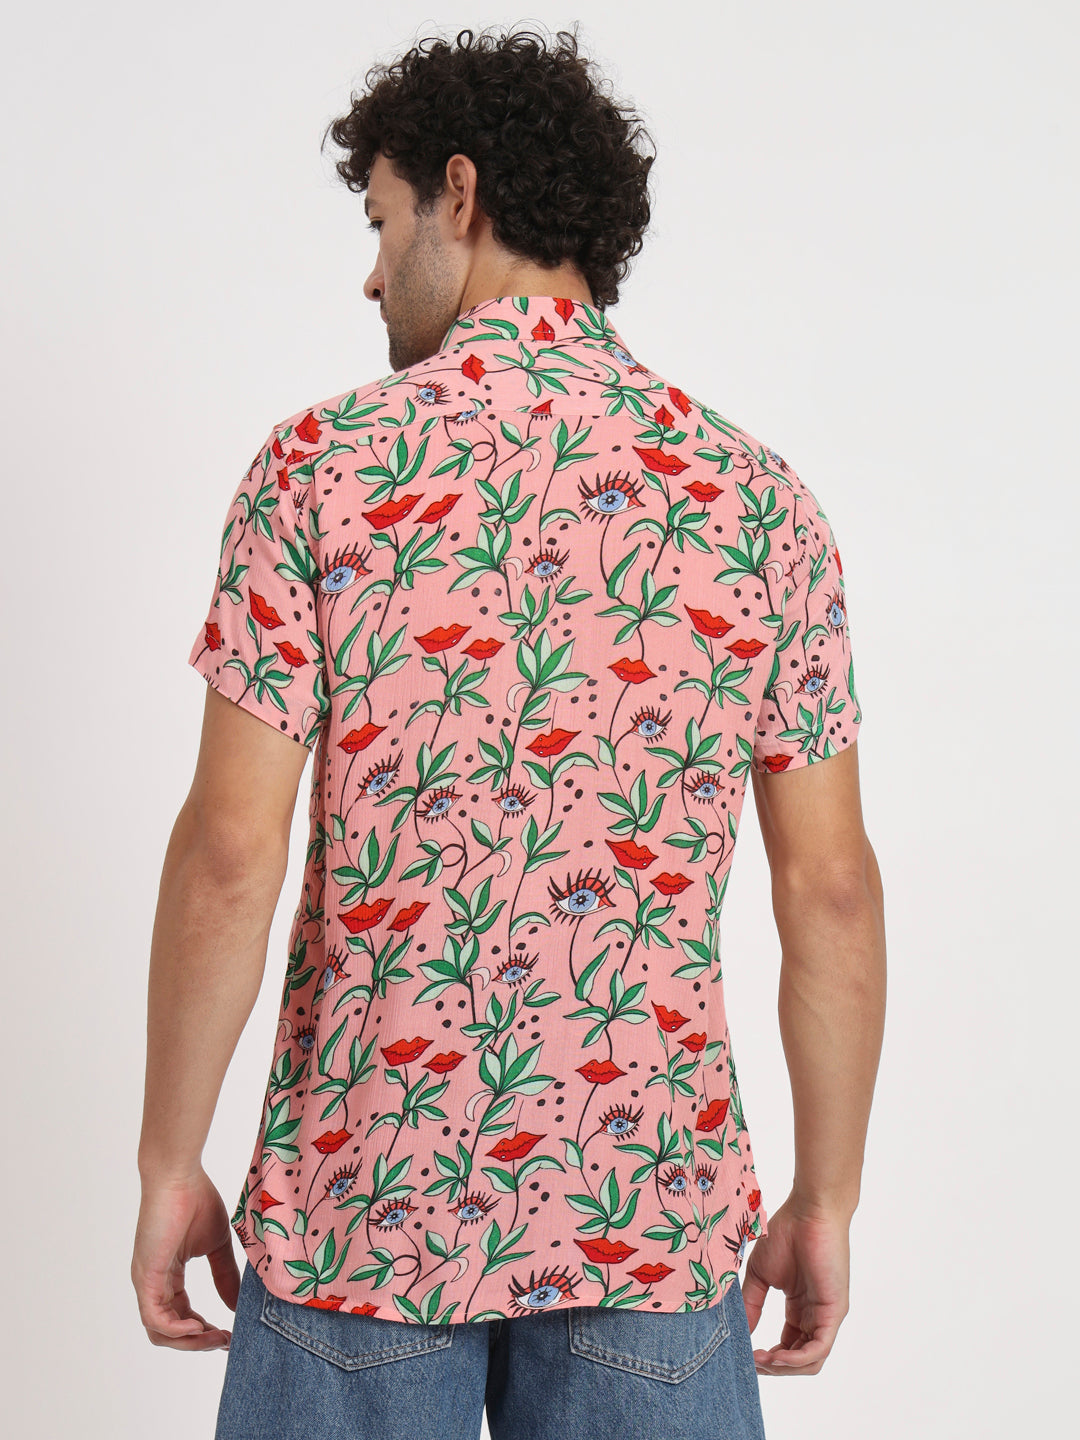 Firangi Yarn Relaxed Fit Super Flowy Re-engineered Cotton Printed Beach Shirt in Half Sleeves (Paris Pink Love)